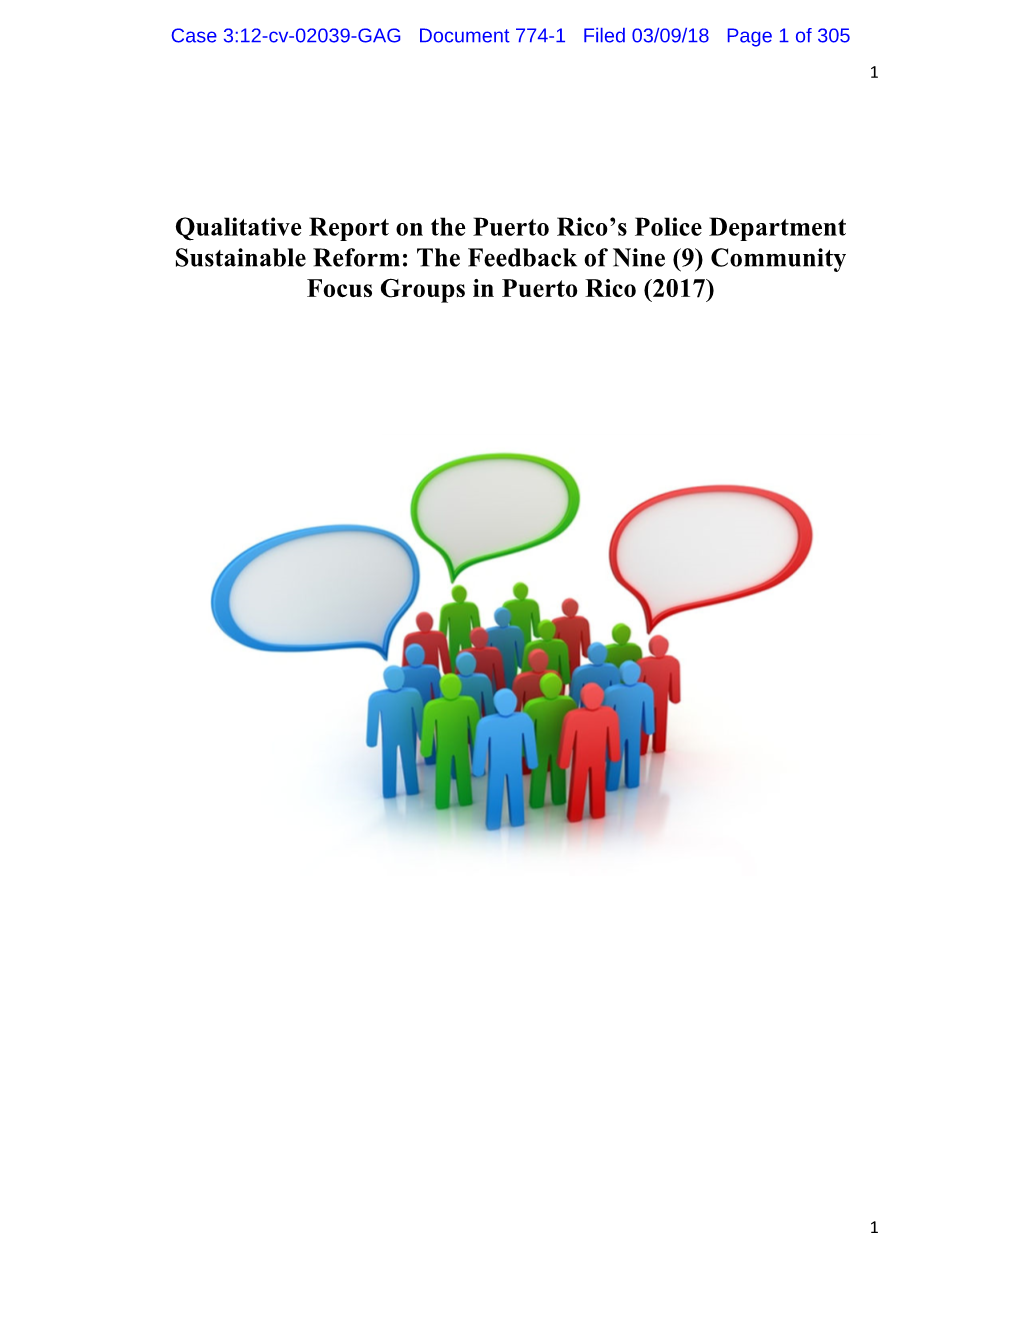 Qualitative Report on the Puerto Rico Police